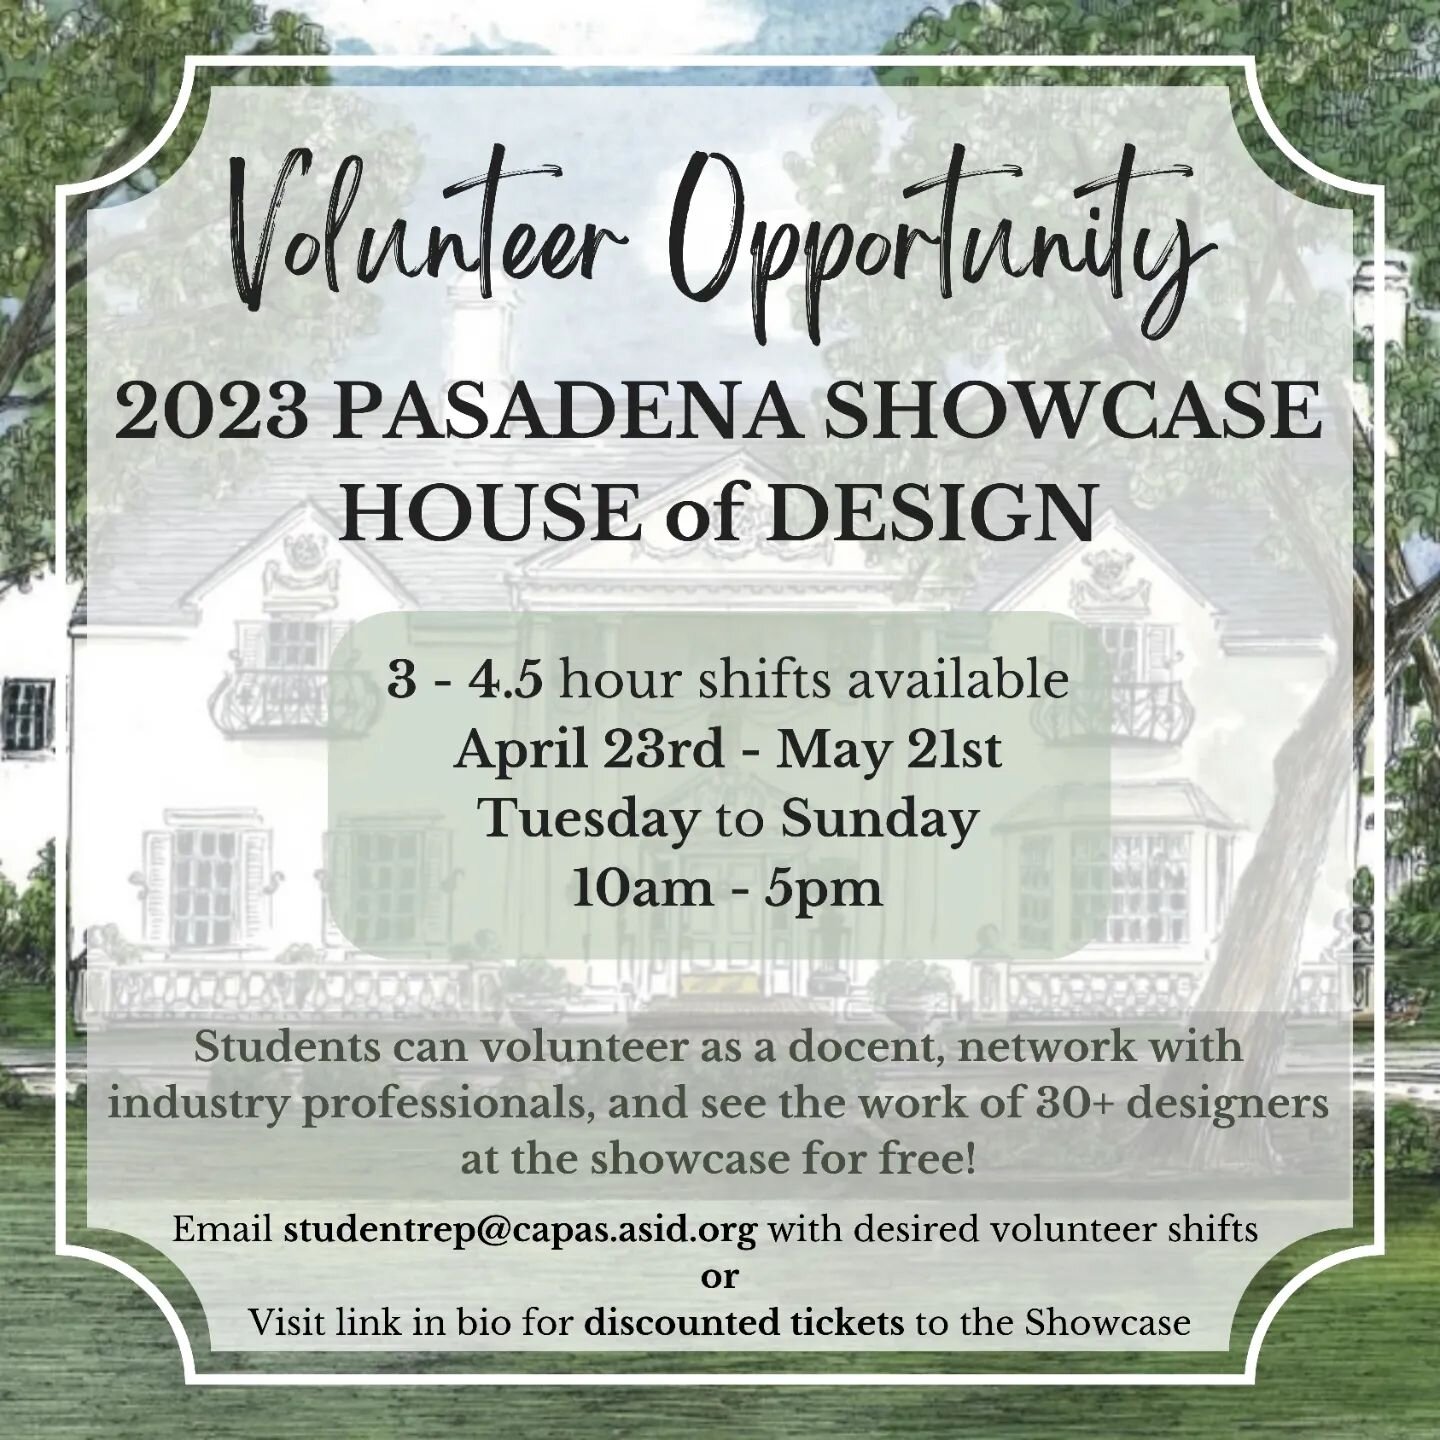 Students, don't miss this opportunity to get involved in our design community by volunteering as a docent at the 2023 Pasadena Showcase House of Design! 3-4.5 hour shifts available between April 23rd - May 21st. 

As a volunteer, you'll have the oppo